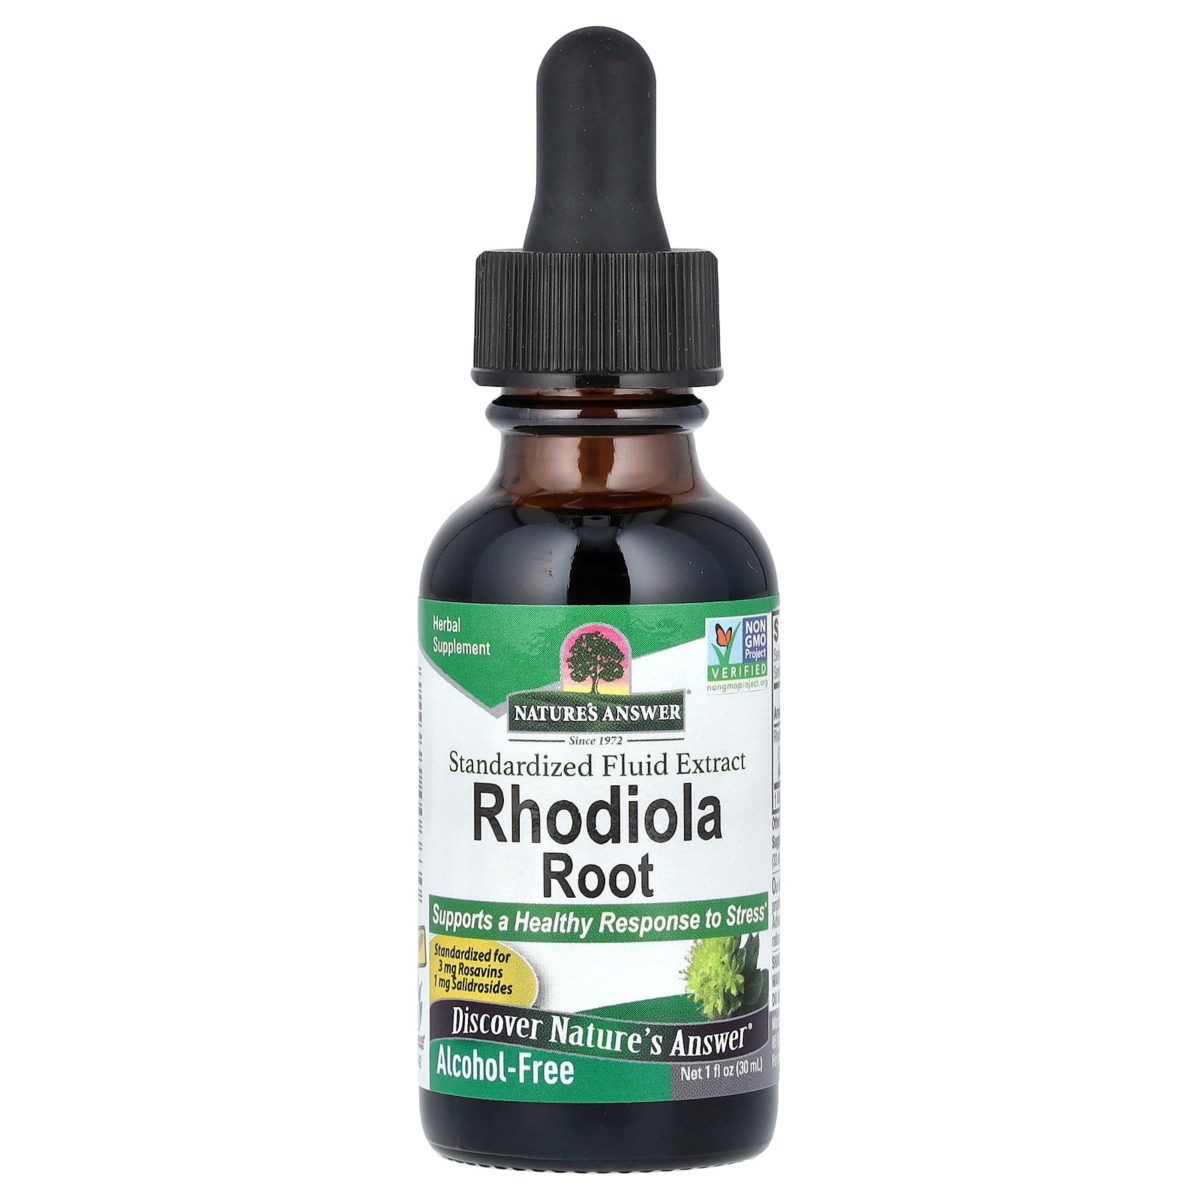 Rhodiola Root Standardized Fluid Extract Alcohol-Free - 1 fl oz (30 ml) - Assorted Pre-Pack